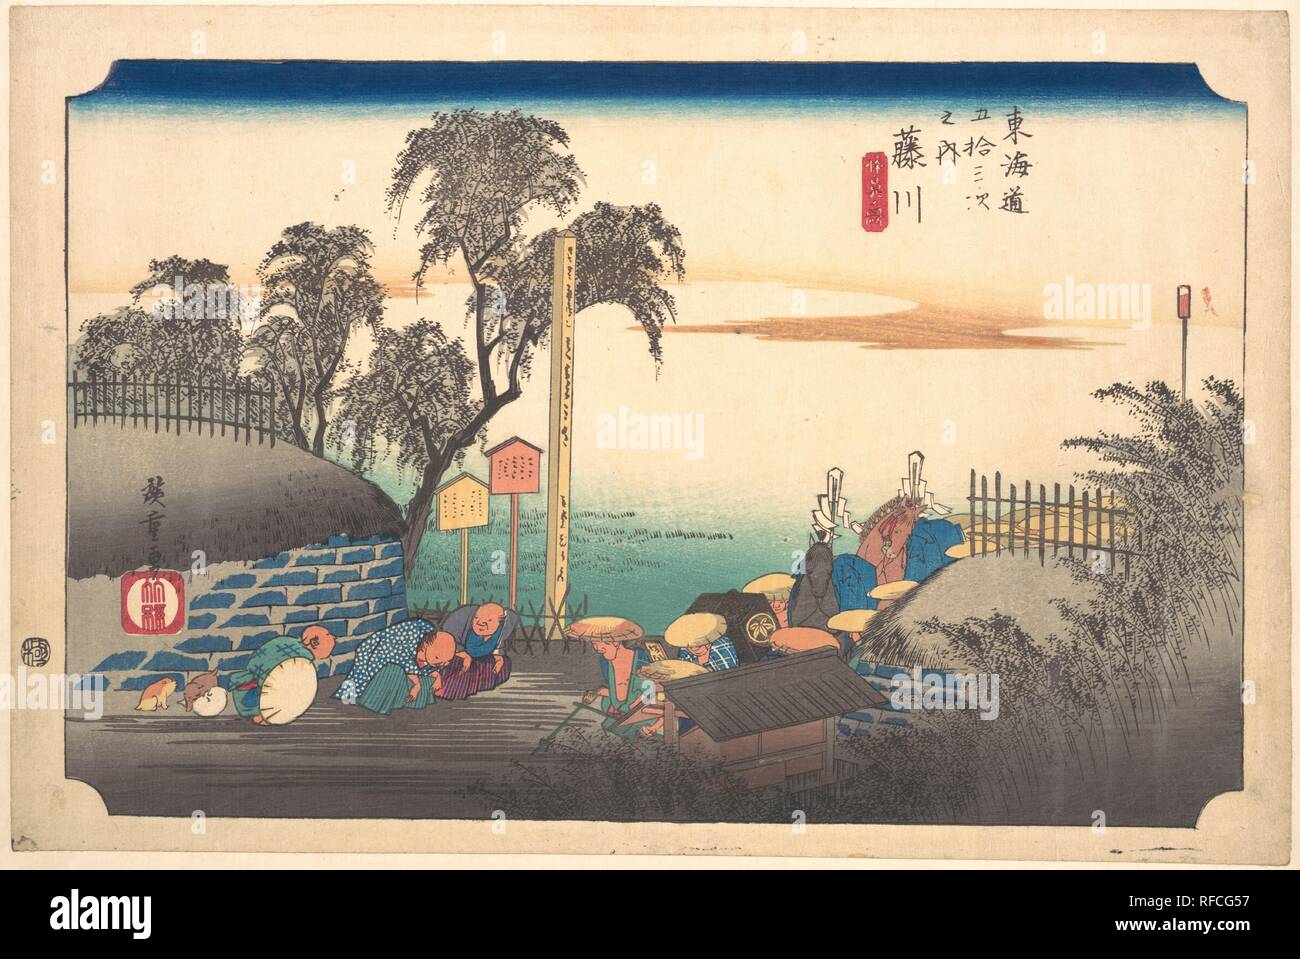 Station Thirty-Eight: Fujikawa, Scene at the Border, from the Fifty-Three Stations of the Tokaido. Artist: Utagawa Hiroshige (Japanese, Tokyo (Edo) 1797-1858 Tokyo (Edo)). Culture: Japan. Dimensions: 9 x 14 in. (22.9 x 35.6 cm). Date: ca. 1833-34.  Officials from Fujikawa bow and welcome a procession representing the Tokugawa government. They traveled from Edo to Kyoto annually to deliver a gift of horses to the emperor on the first day of the eighth month. Hiroshige joined the 1832 procession to Kyoto. Museum: Metropolitan Museum of Art, New York, USA. Stock Photo